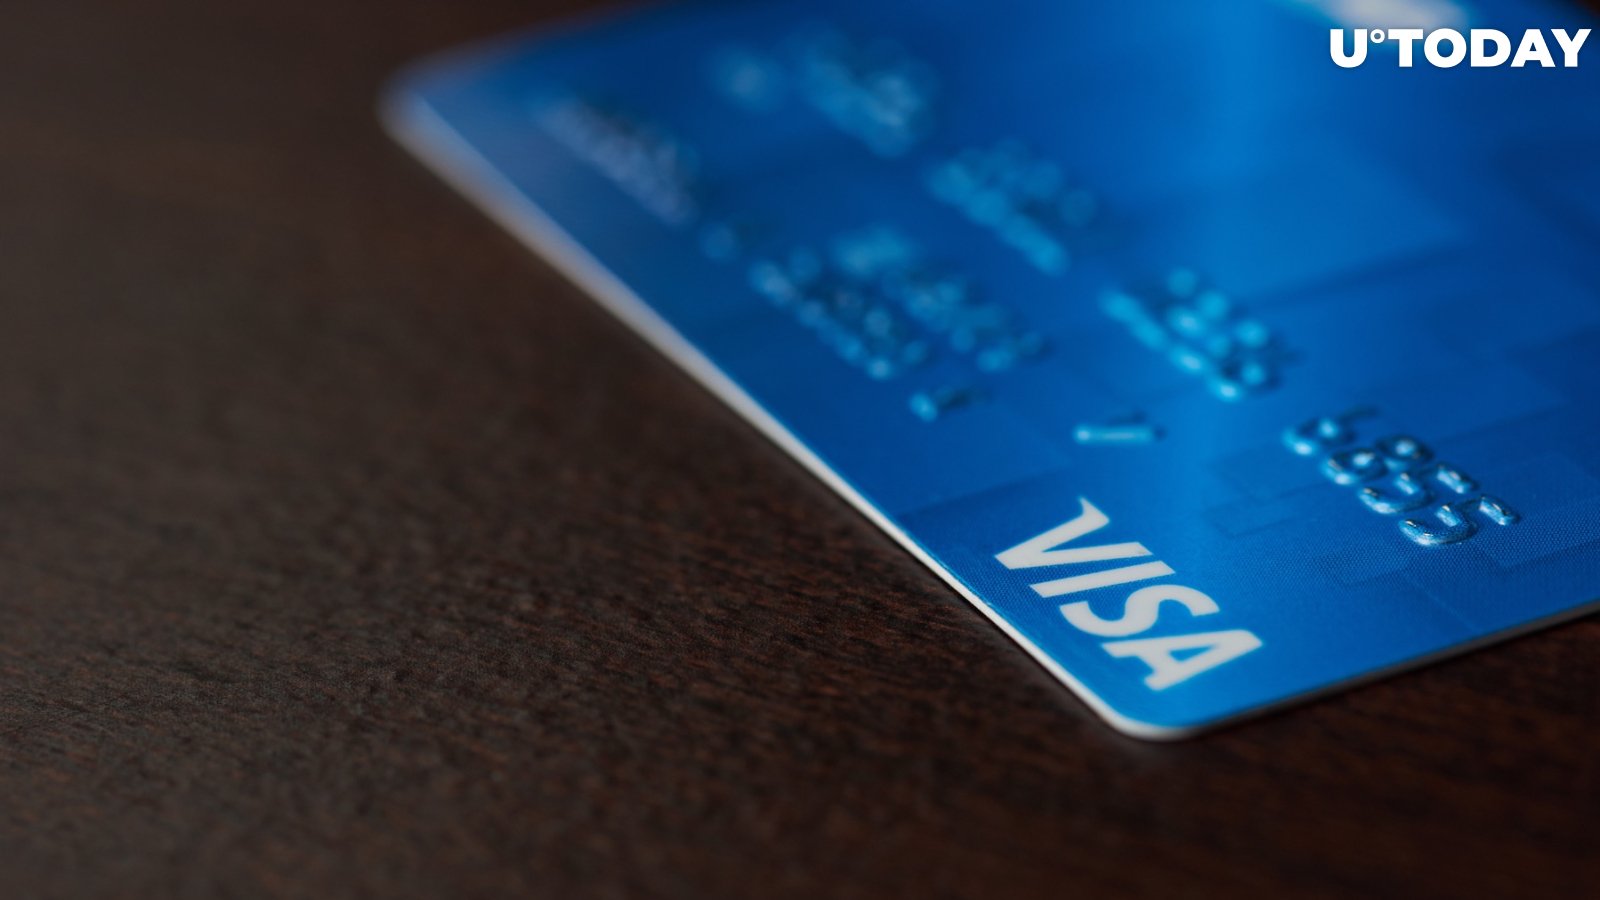 Visa Has Plans to Launch Its Own Cryptocurrency Wallet